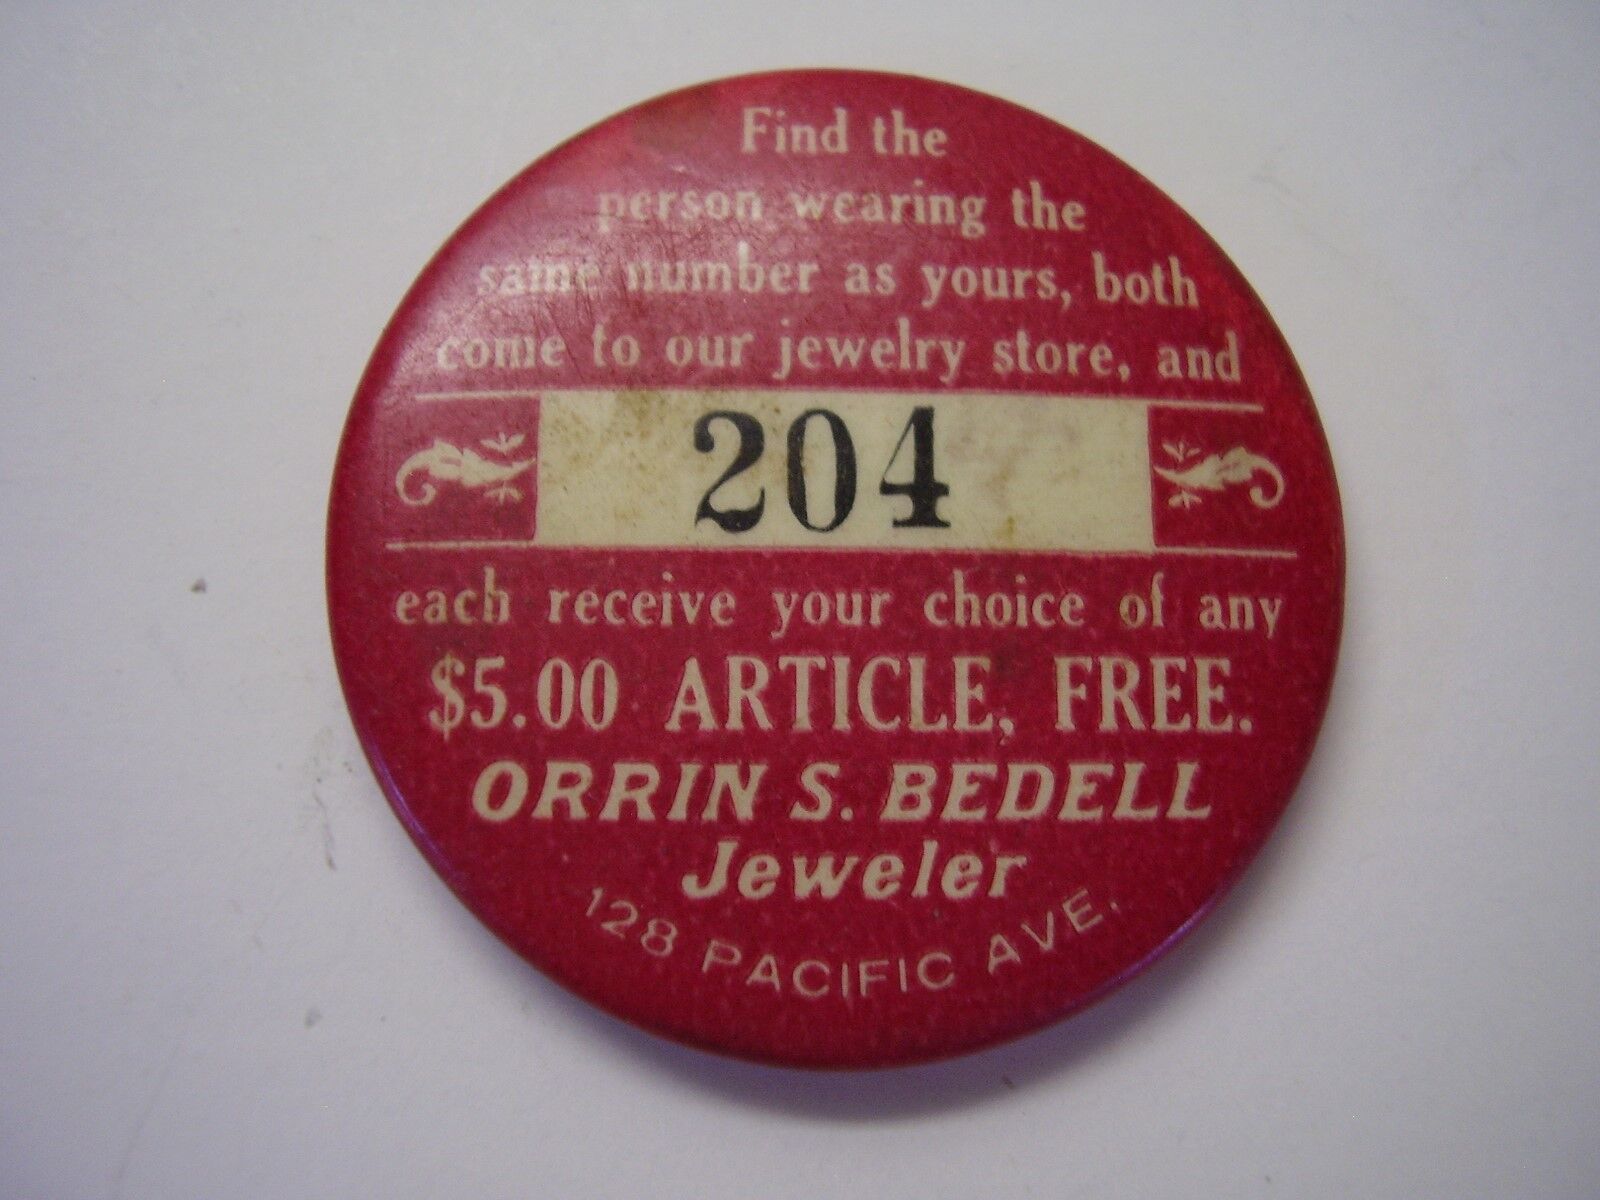 Vintage Crowd-sourcing Pinback for Jewelry Store Customer Matchup Challenge